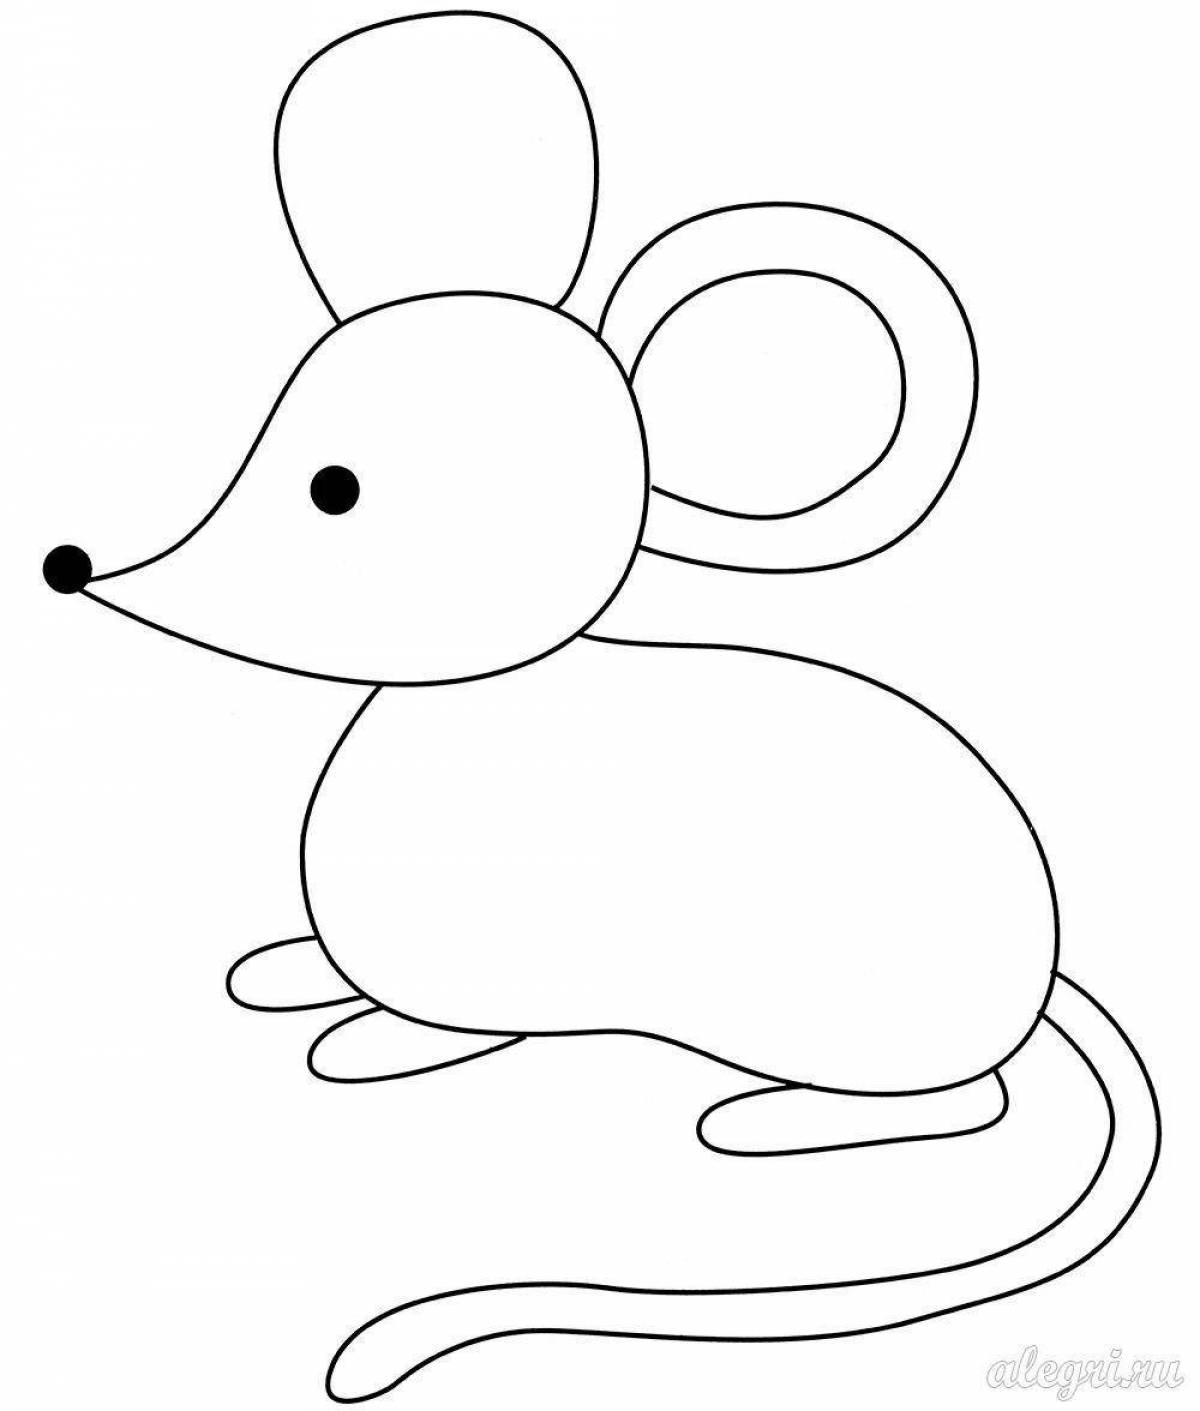 Color-explosion mouse coloring page for 3-4 year olds